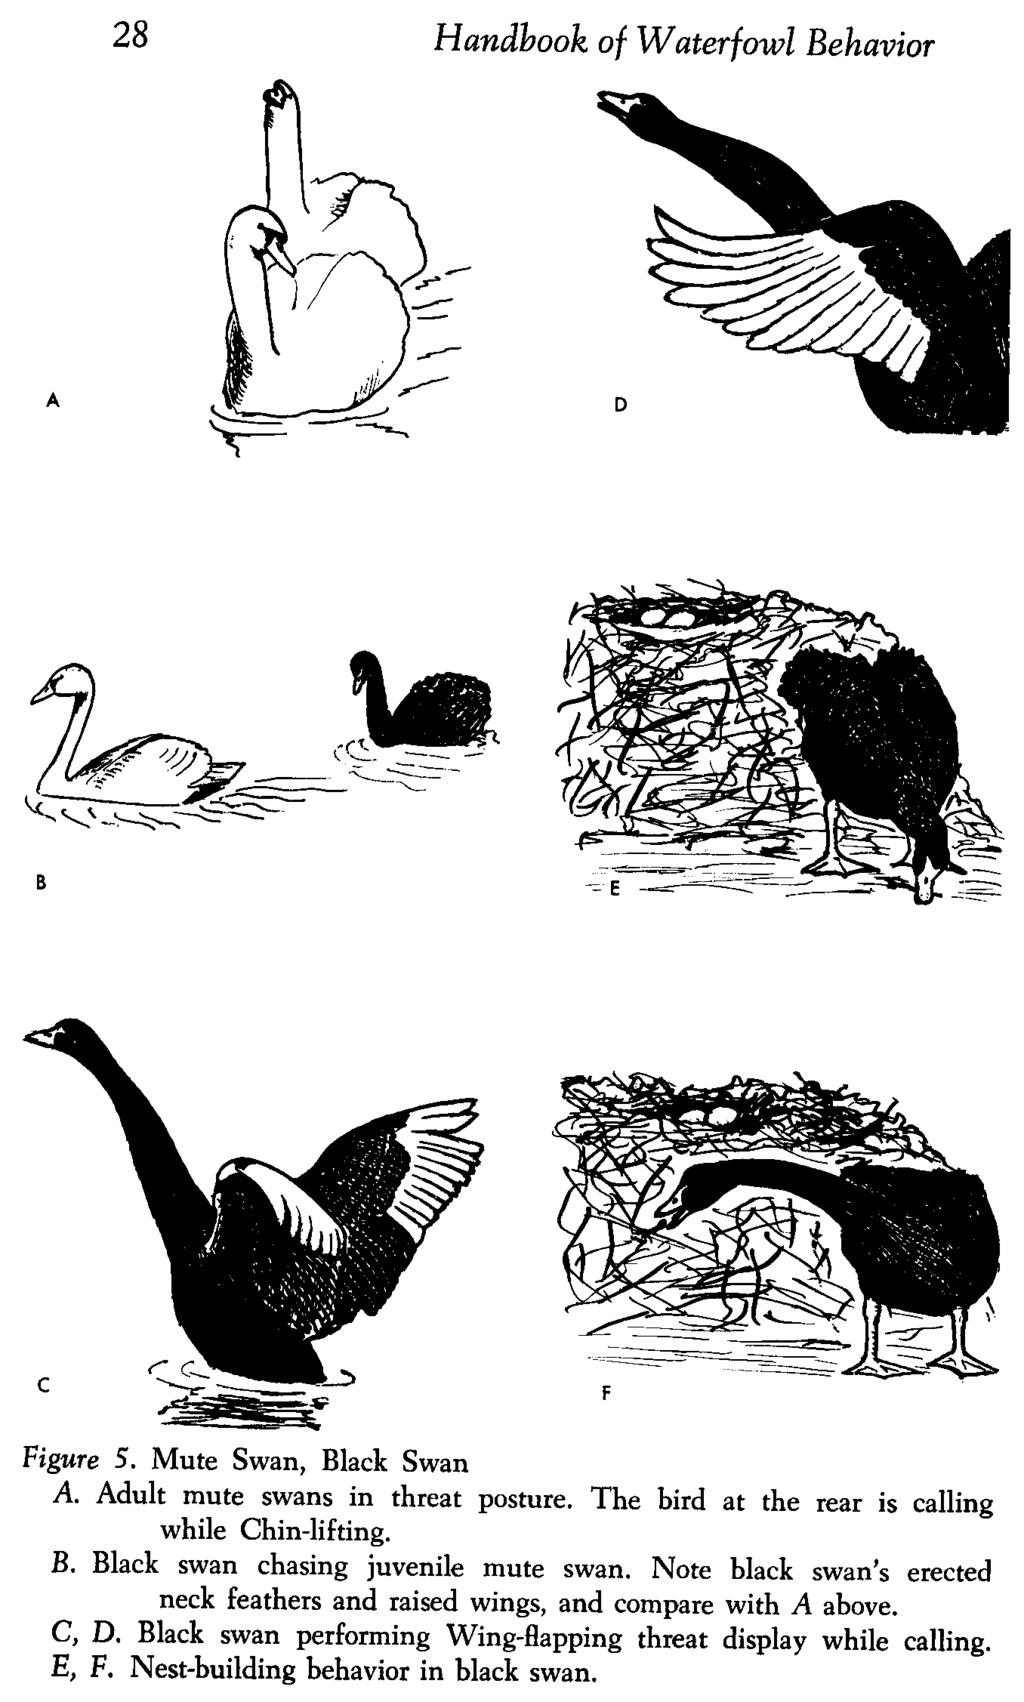 28 Handbook of Waterfowl Behavior Figure 5. Mute Swan, Black Swan A. Adult mute swans in threat posture. The bird at the rear is calling while Chin-lifting. B. Black swan chasing juvenile mute swan.